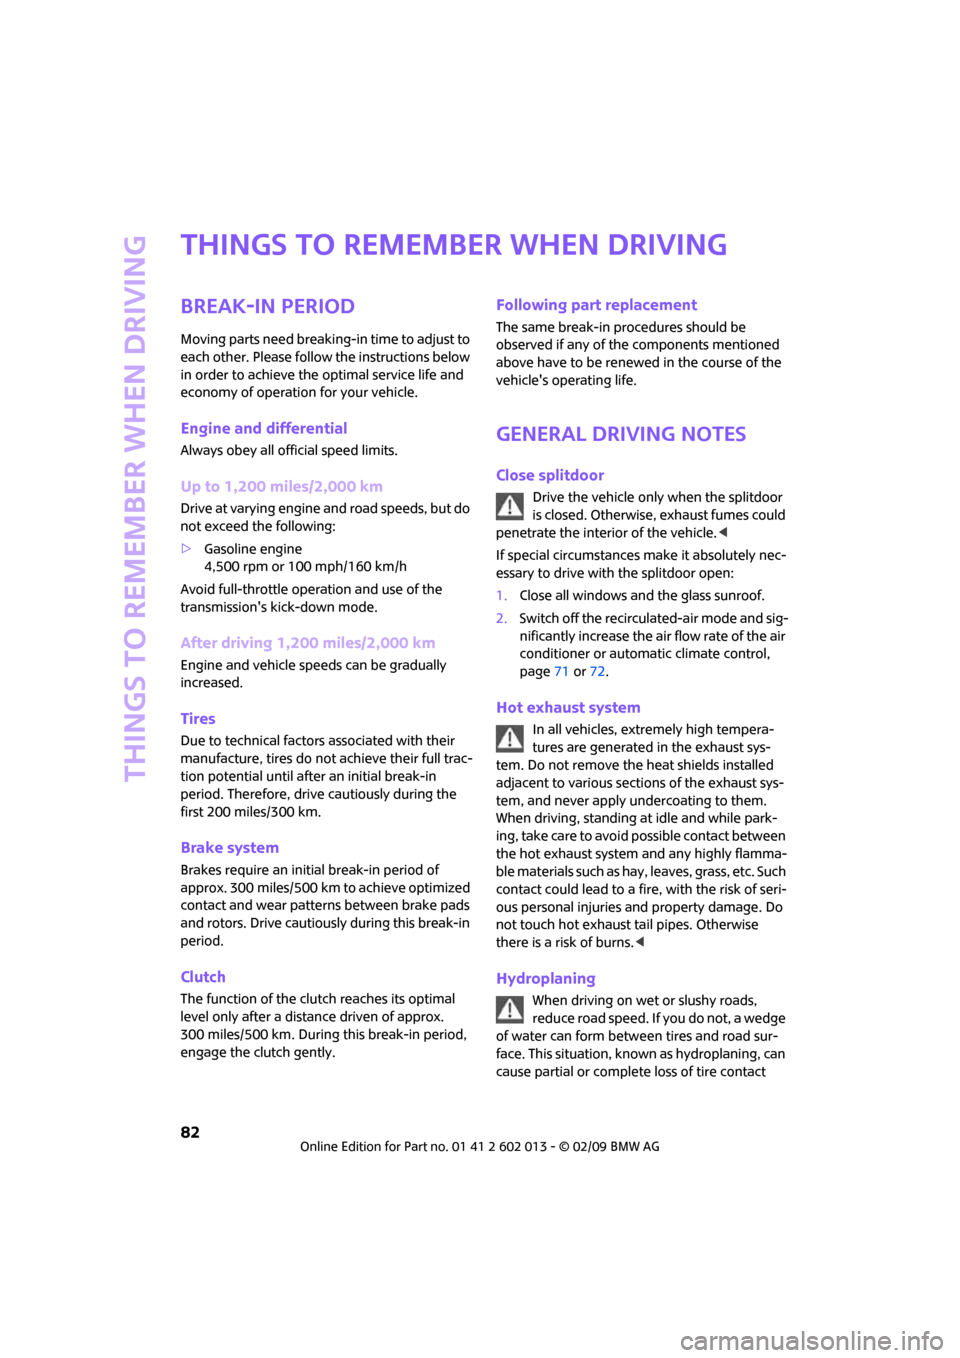 MINI Clubman 2009 Manual Online Things to remember when driving
82
Things to remember when driving
Break-in period
Moving parts need breaking-in time to adjust to 
each other. Please follow the instructions below 
in order to achiev